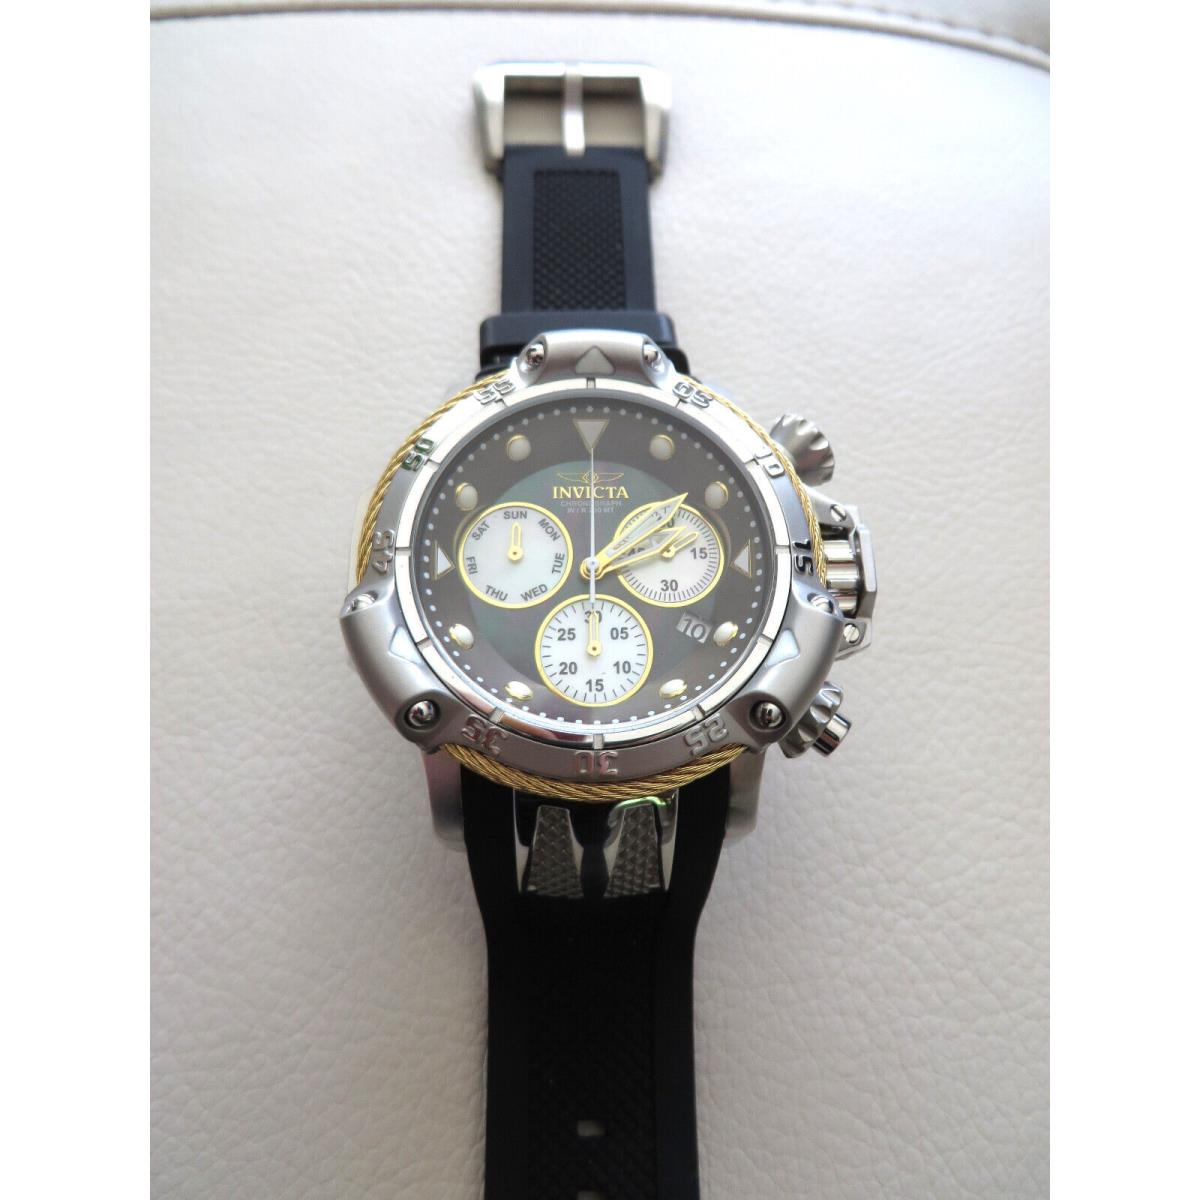 Invicta watch Subaqua - Black Face, Mother of Pearl Dial, Black Band